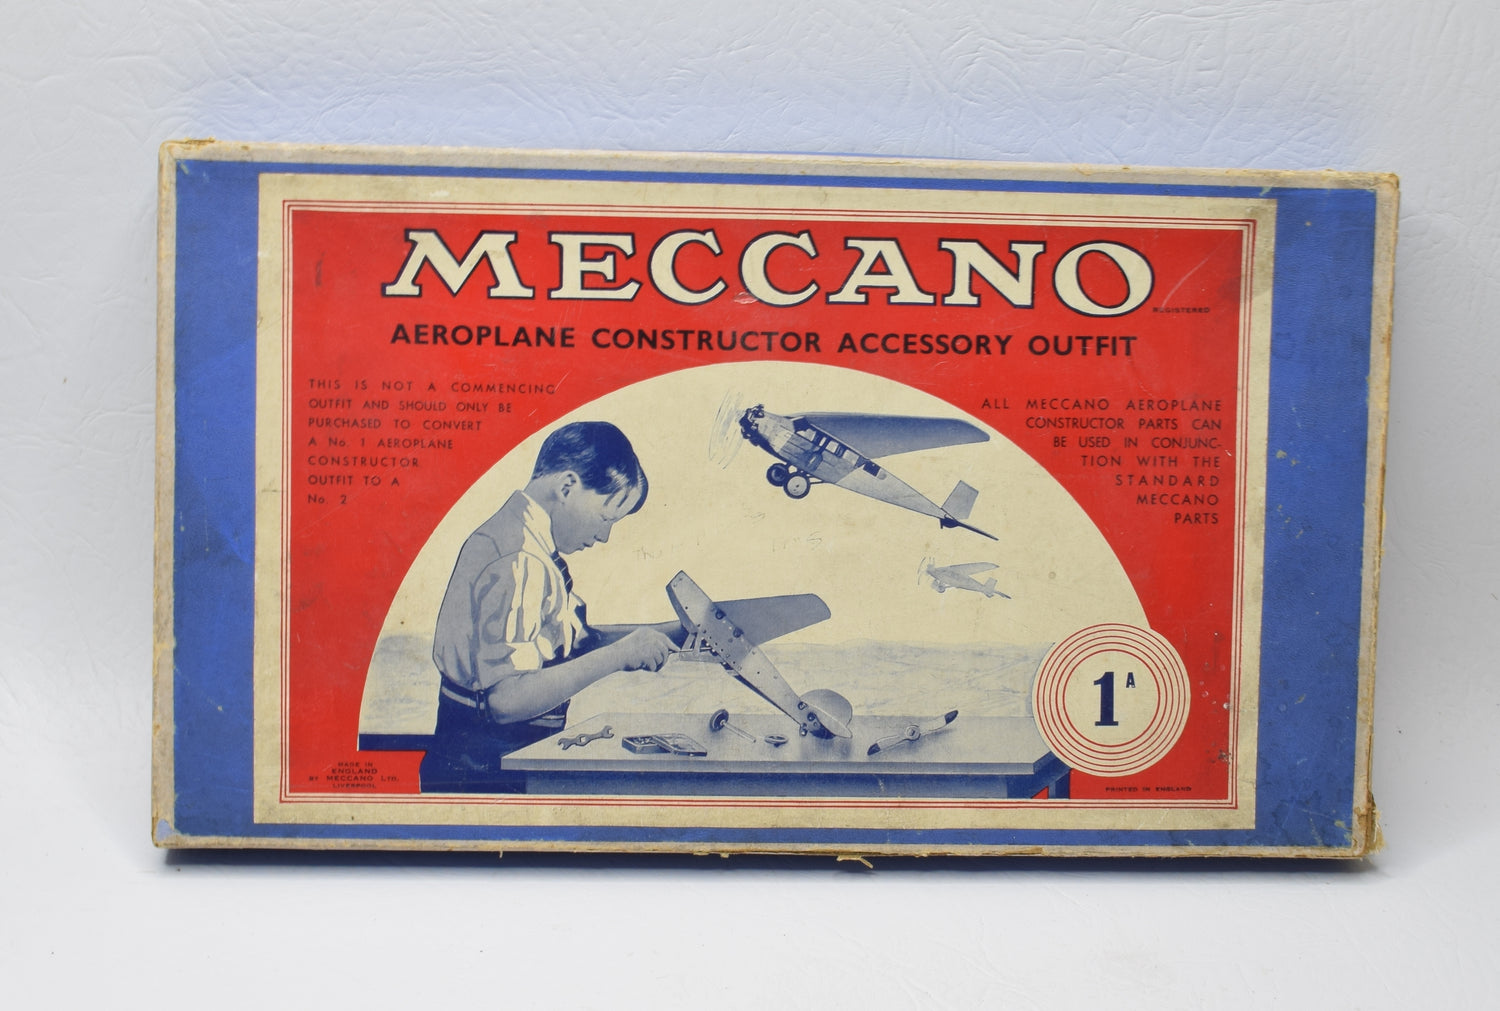 Meccano 1A Aeroplane Constructor  Accessory Outfit for No.1 & 2's Very Near Mint/Boxed